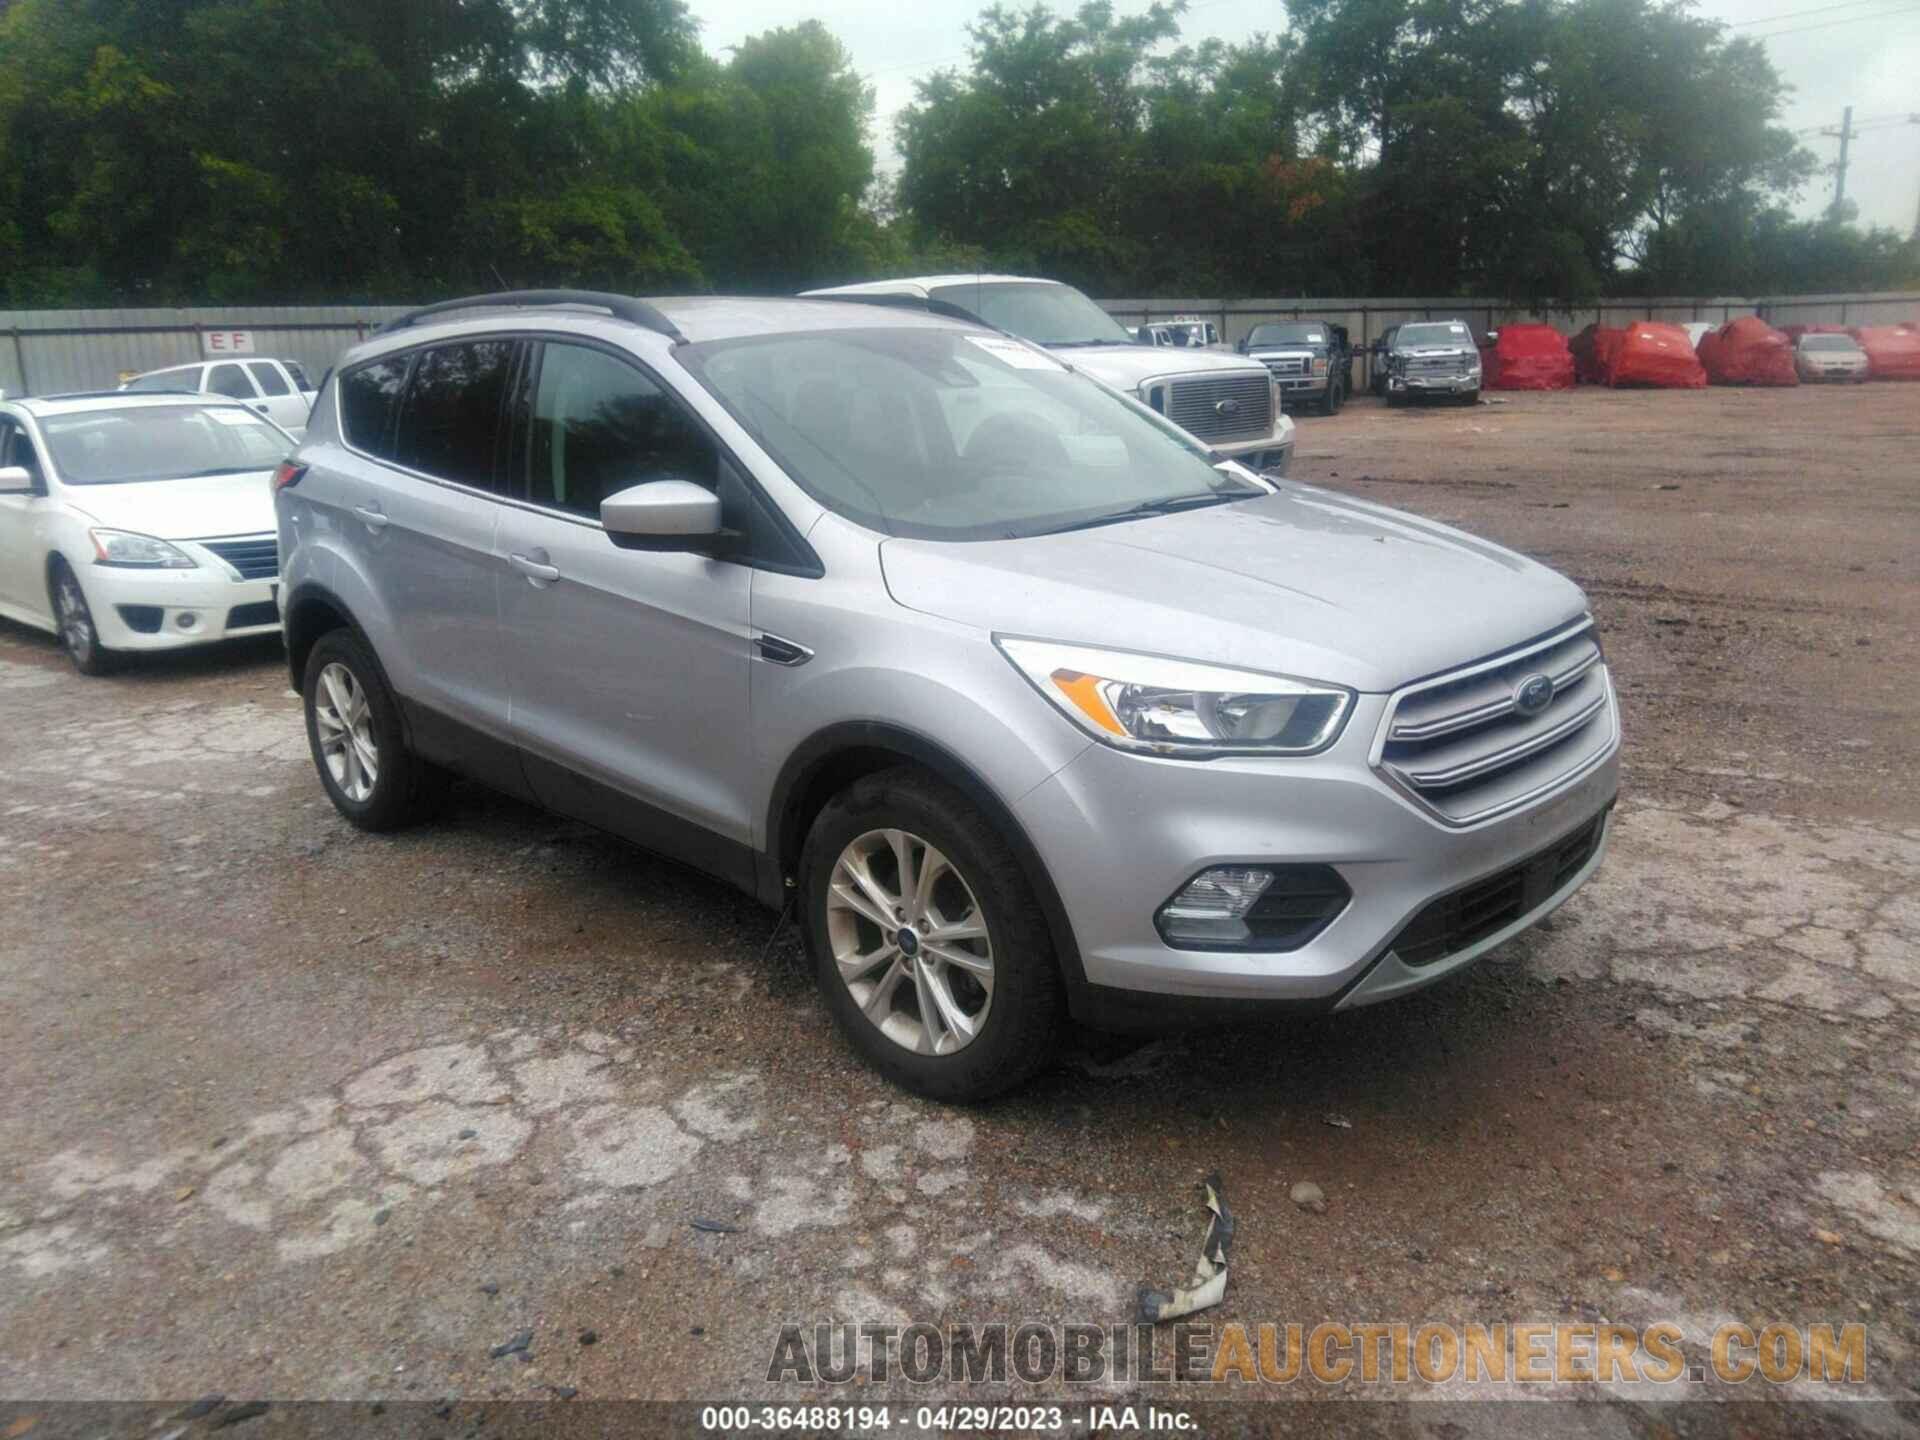 1FMCU0GD7JUD23476 FORD ESCAPE 2018